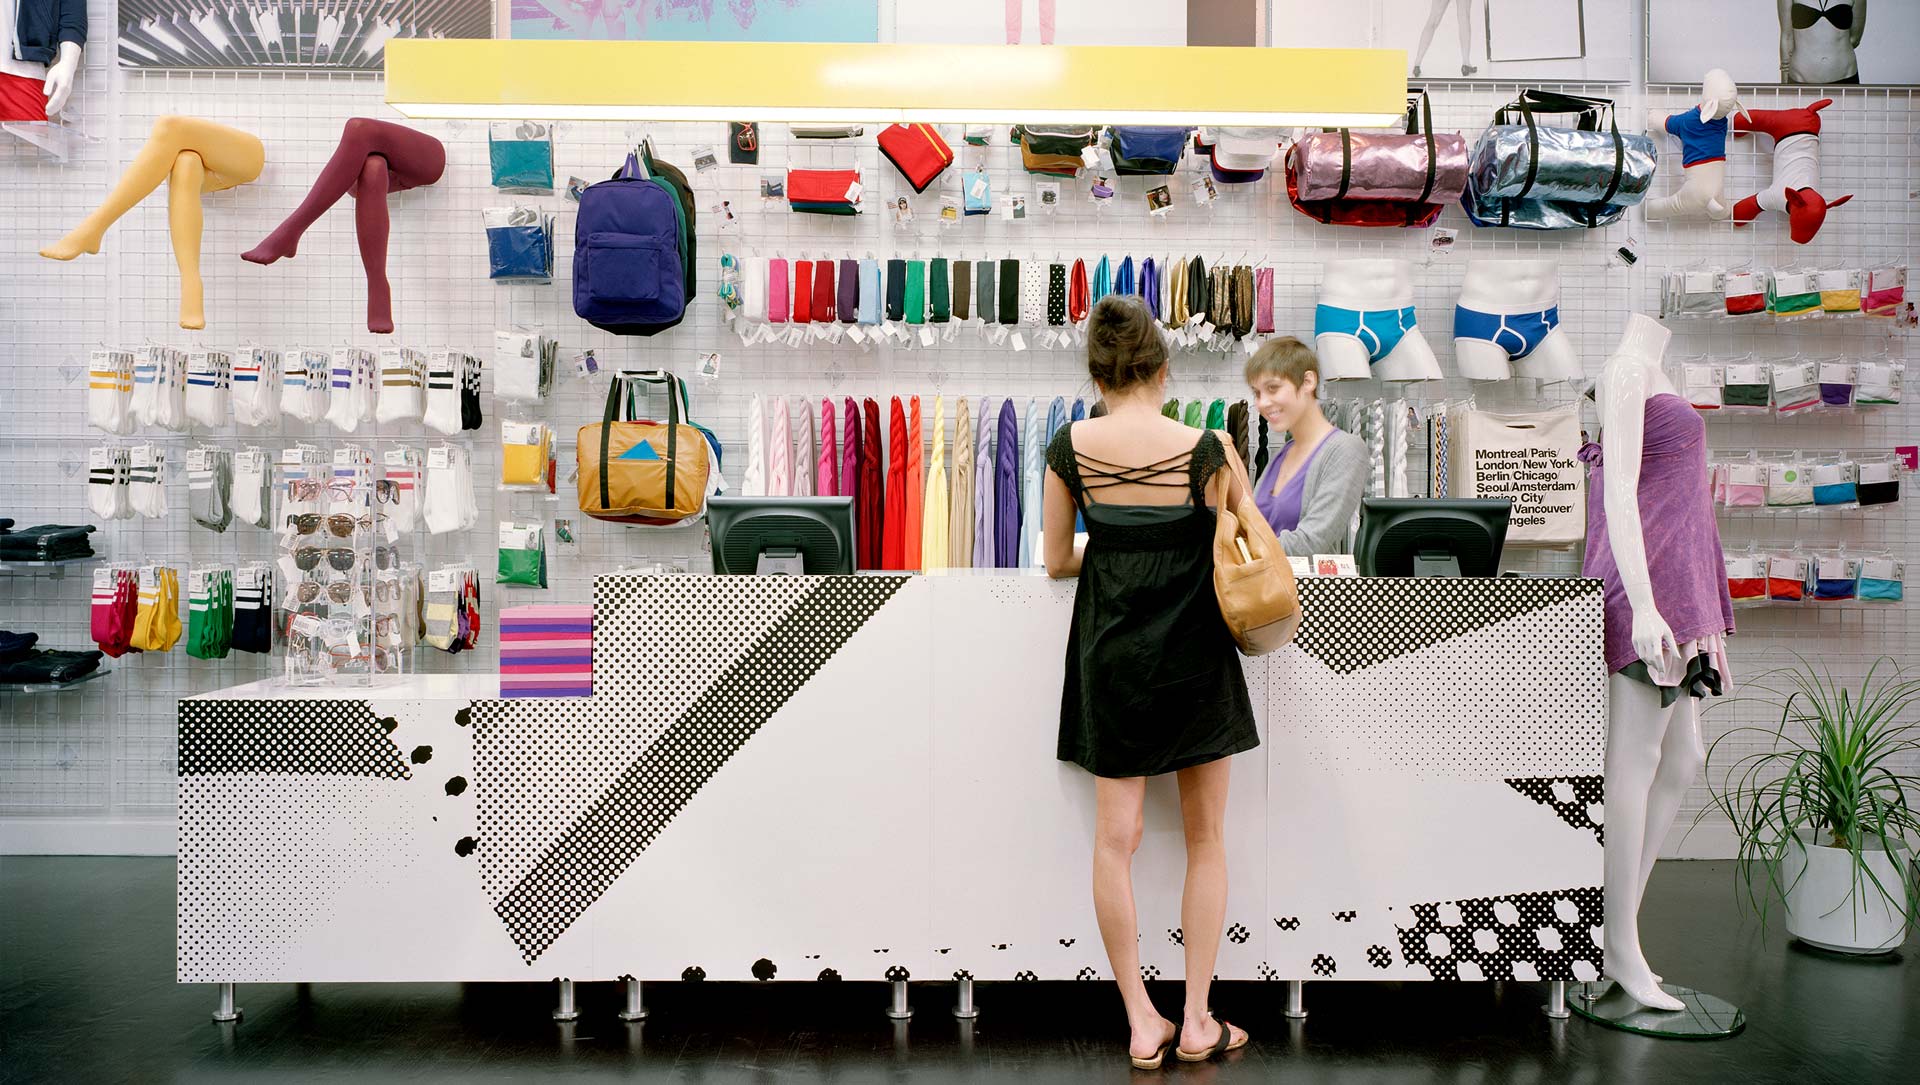 American Apparel LEED Gold Retail Store